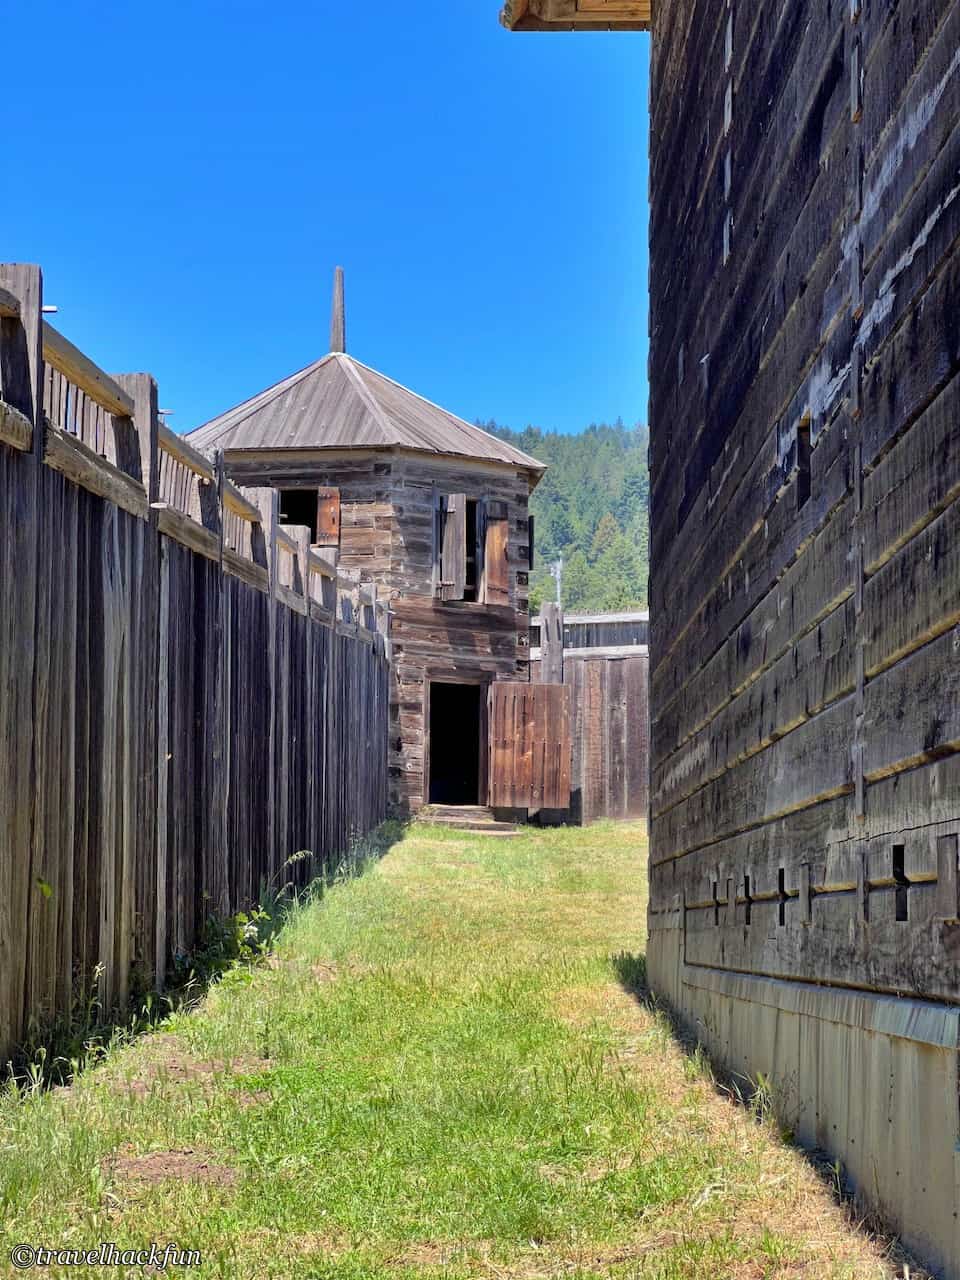 Fort Ross,俄羅斯堡,fort ross state park,fort ross state historic park,fort ross california 8